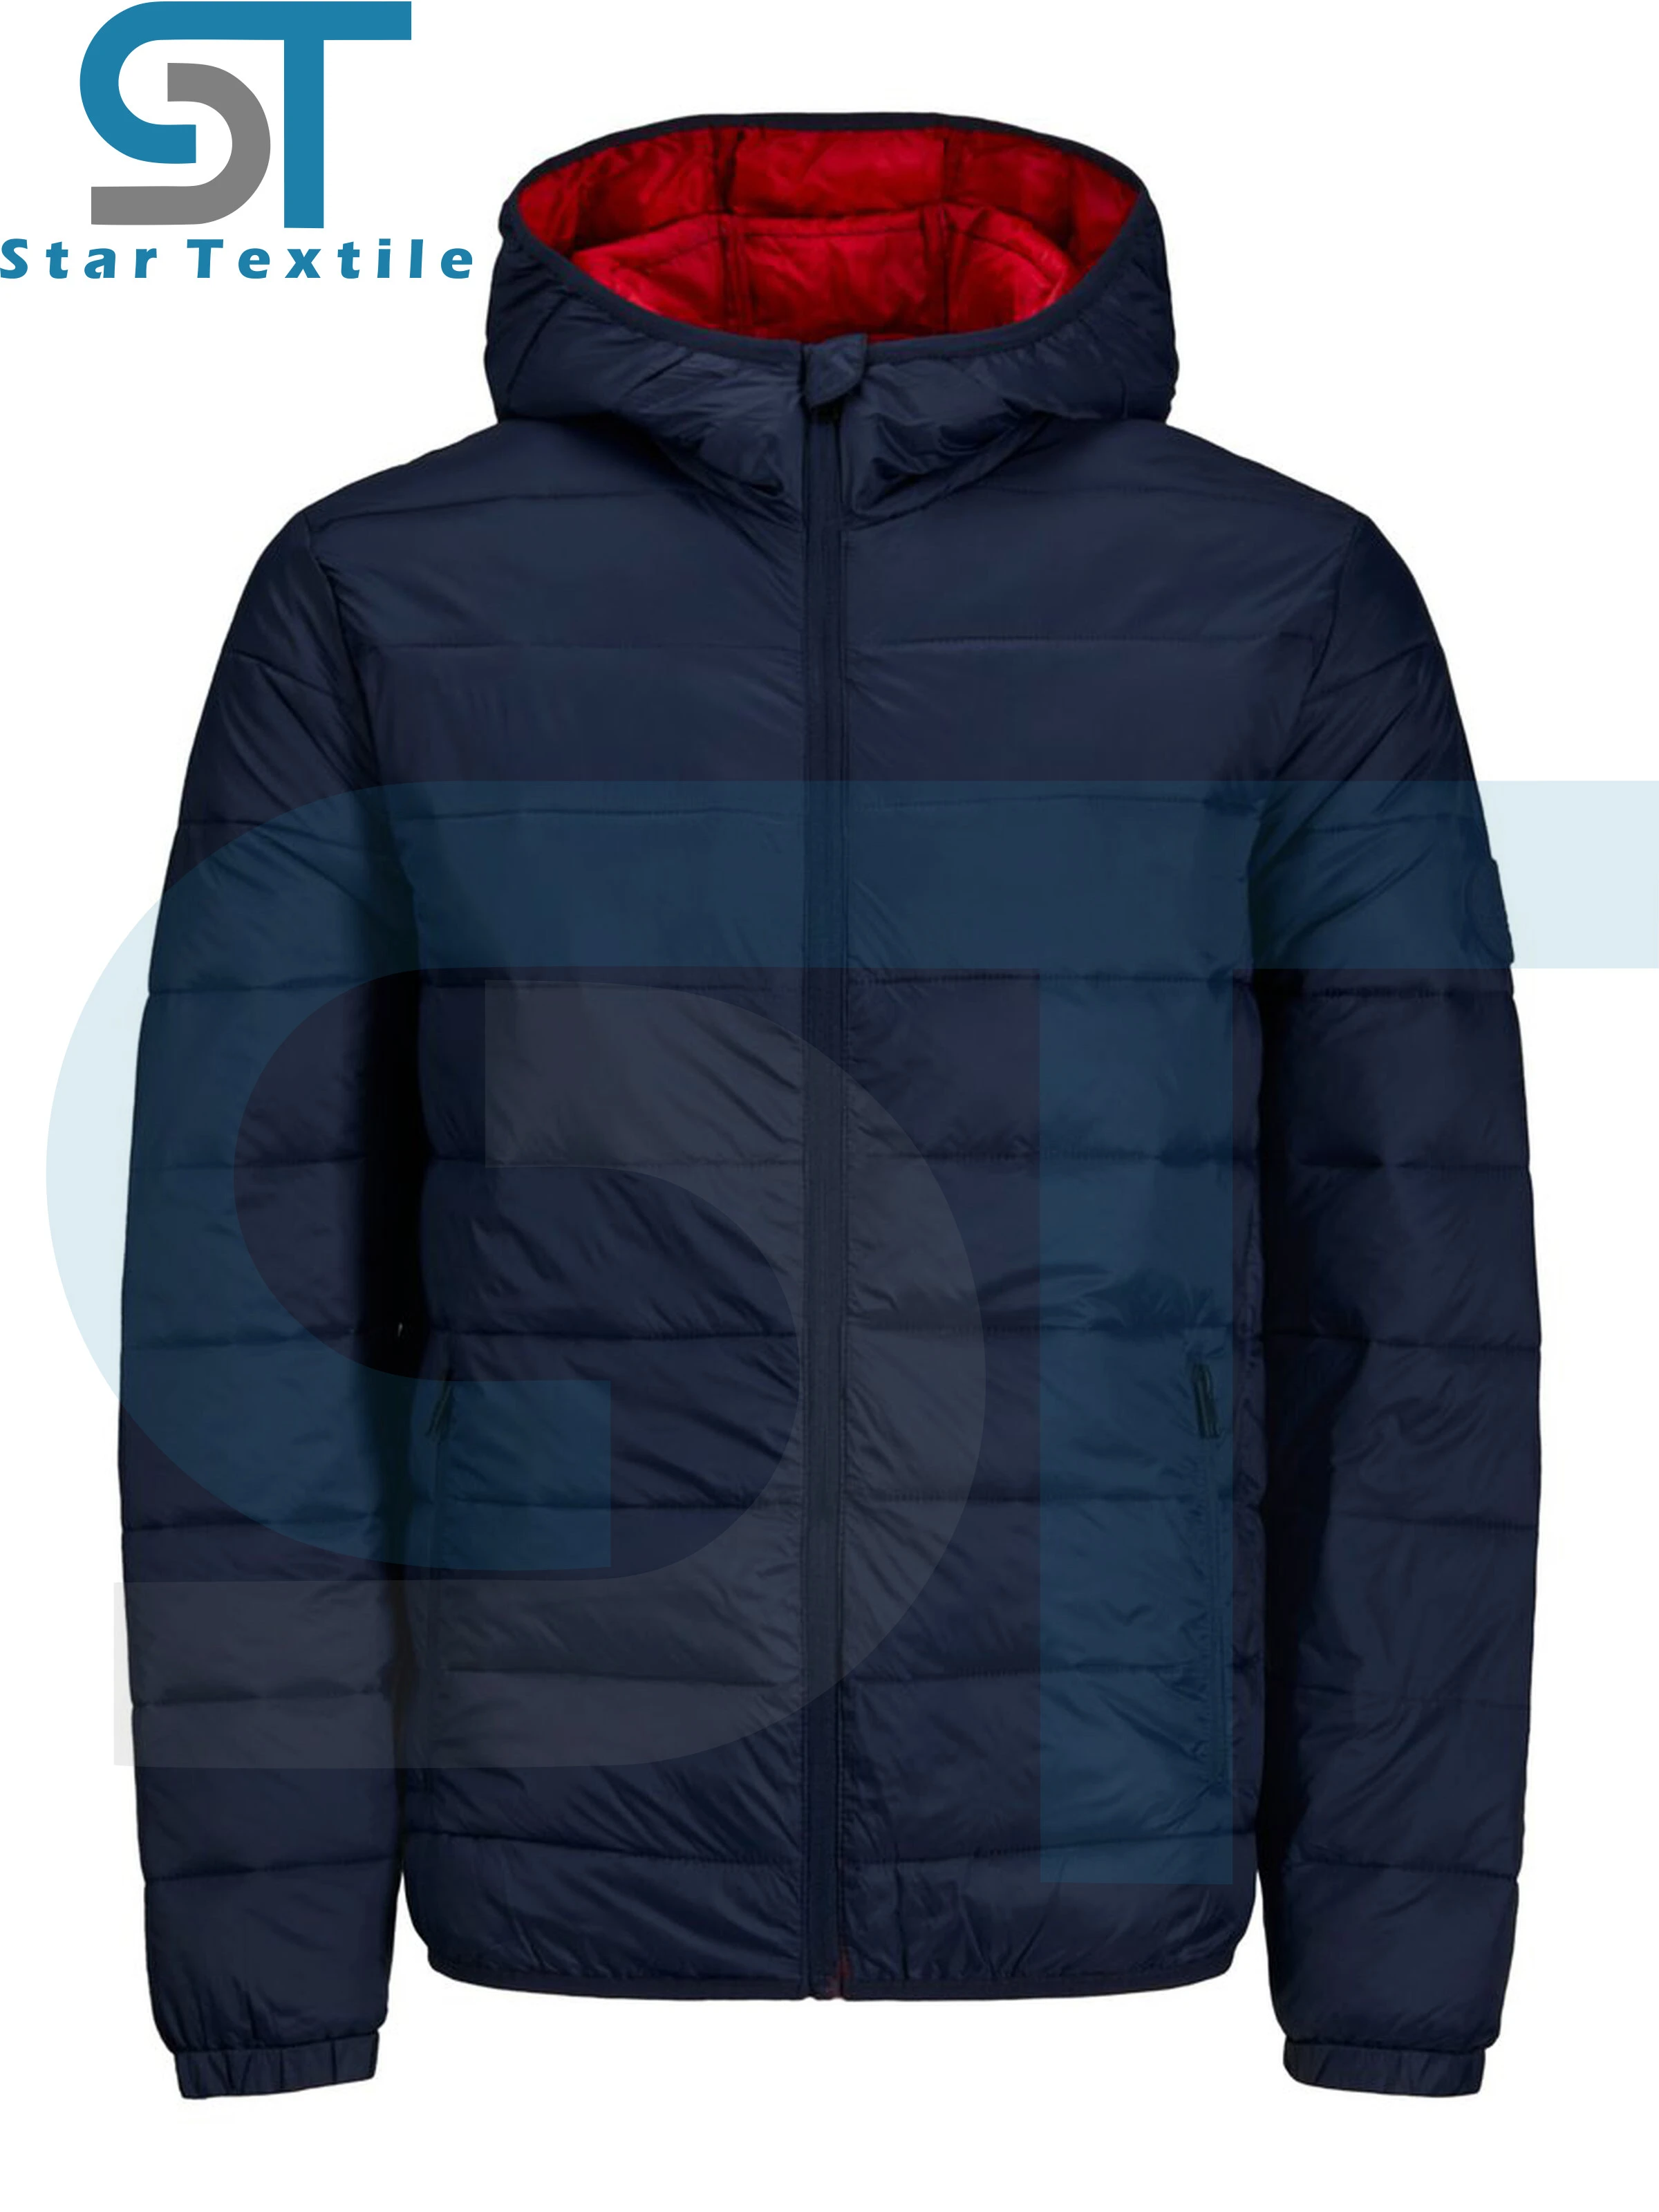 Puffer Jacket Back jacket for men puffer High Quality custom Puffer jacket / Puffy jacket / Quilted padded Jacket, Bubble